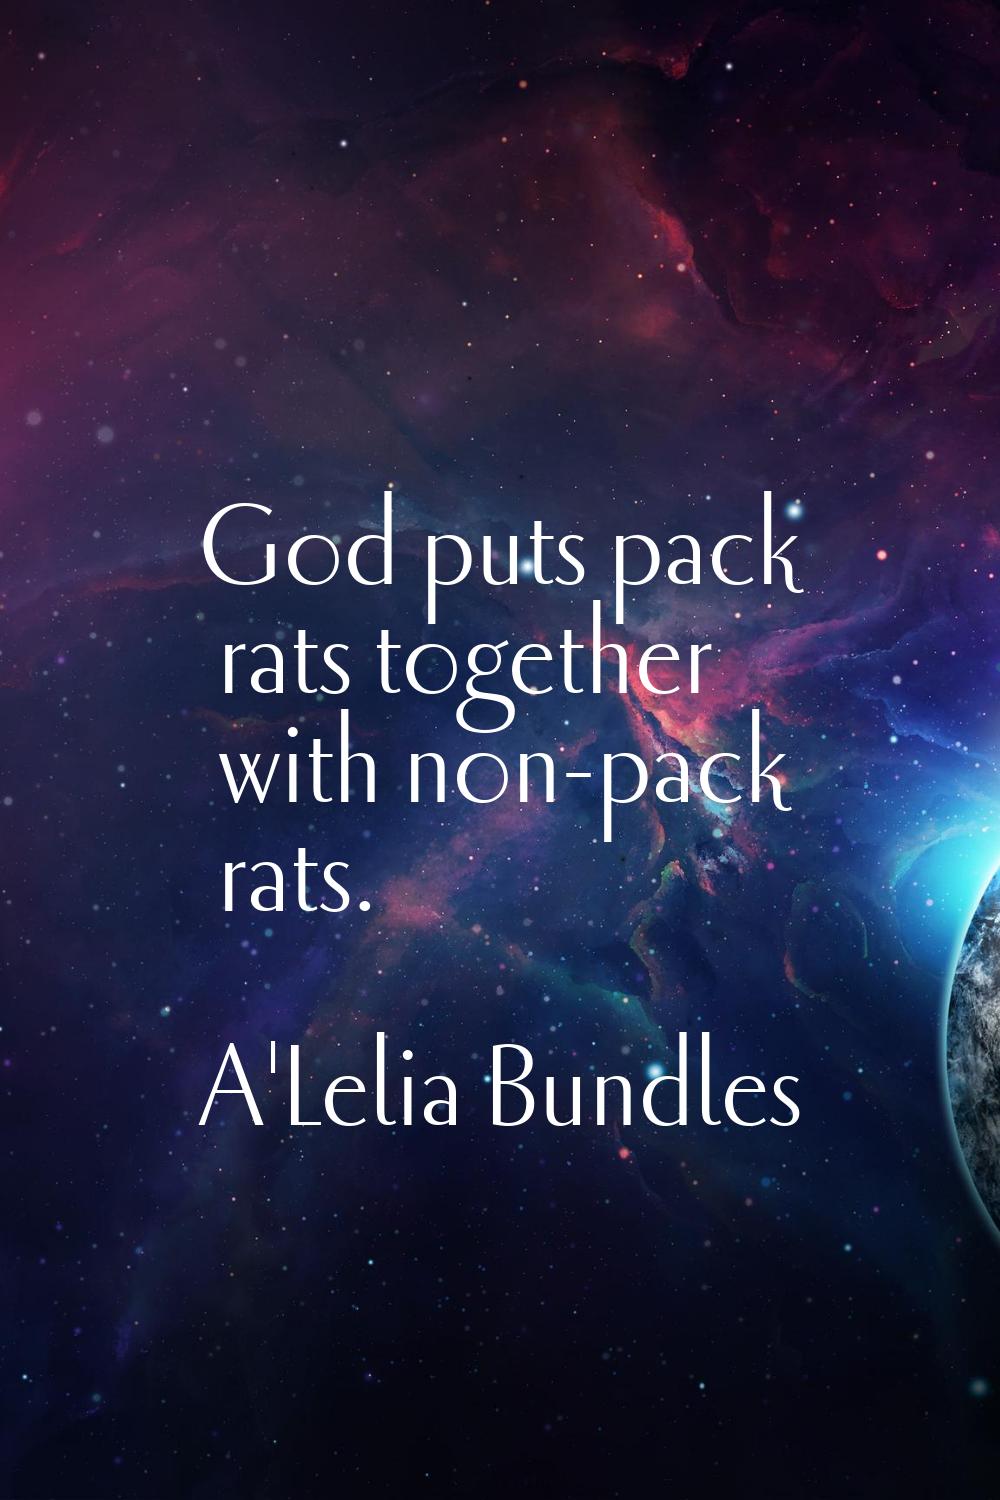 God puts pack rats together with non-pack rats.